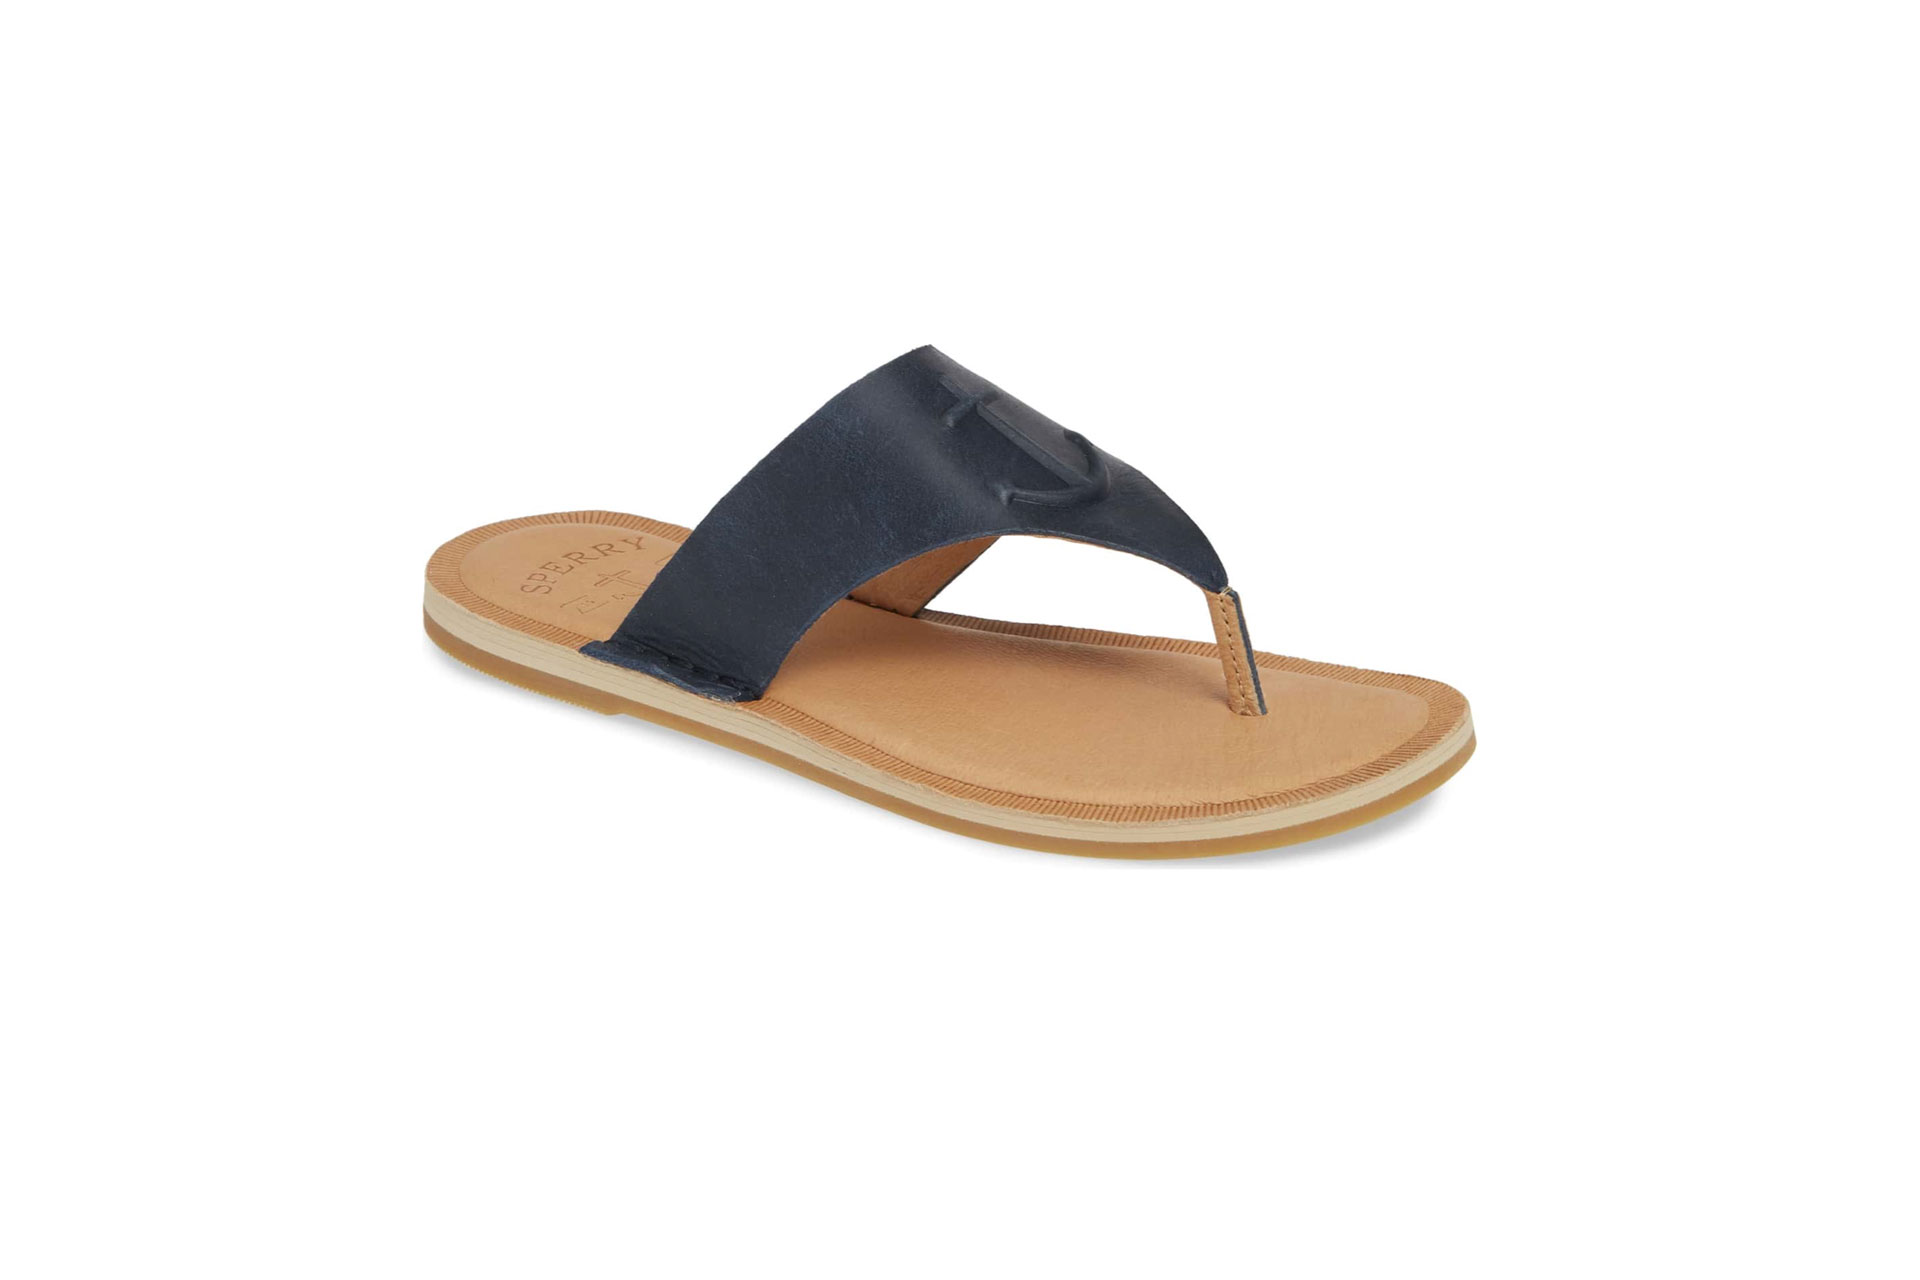 Sperry Seaport Flip Flop; Courtesy of Amazon